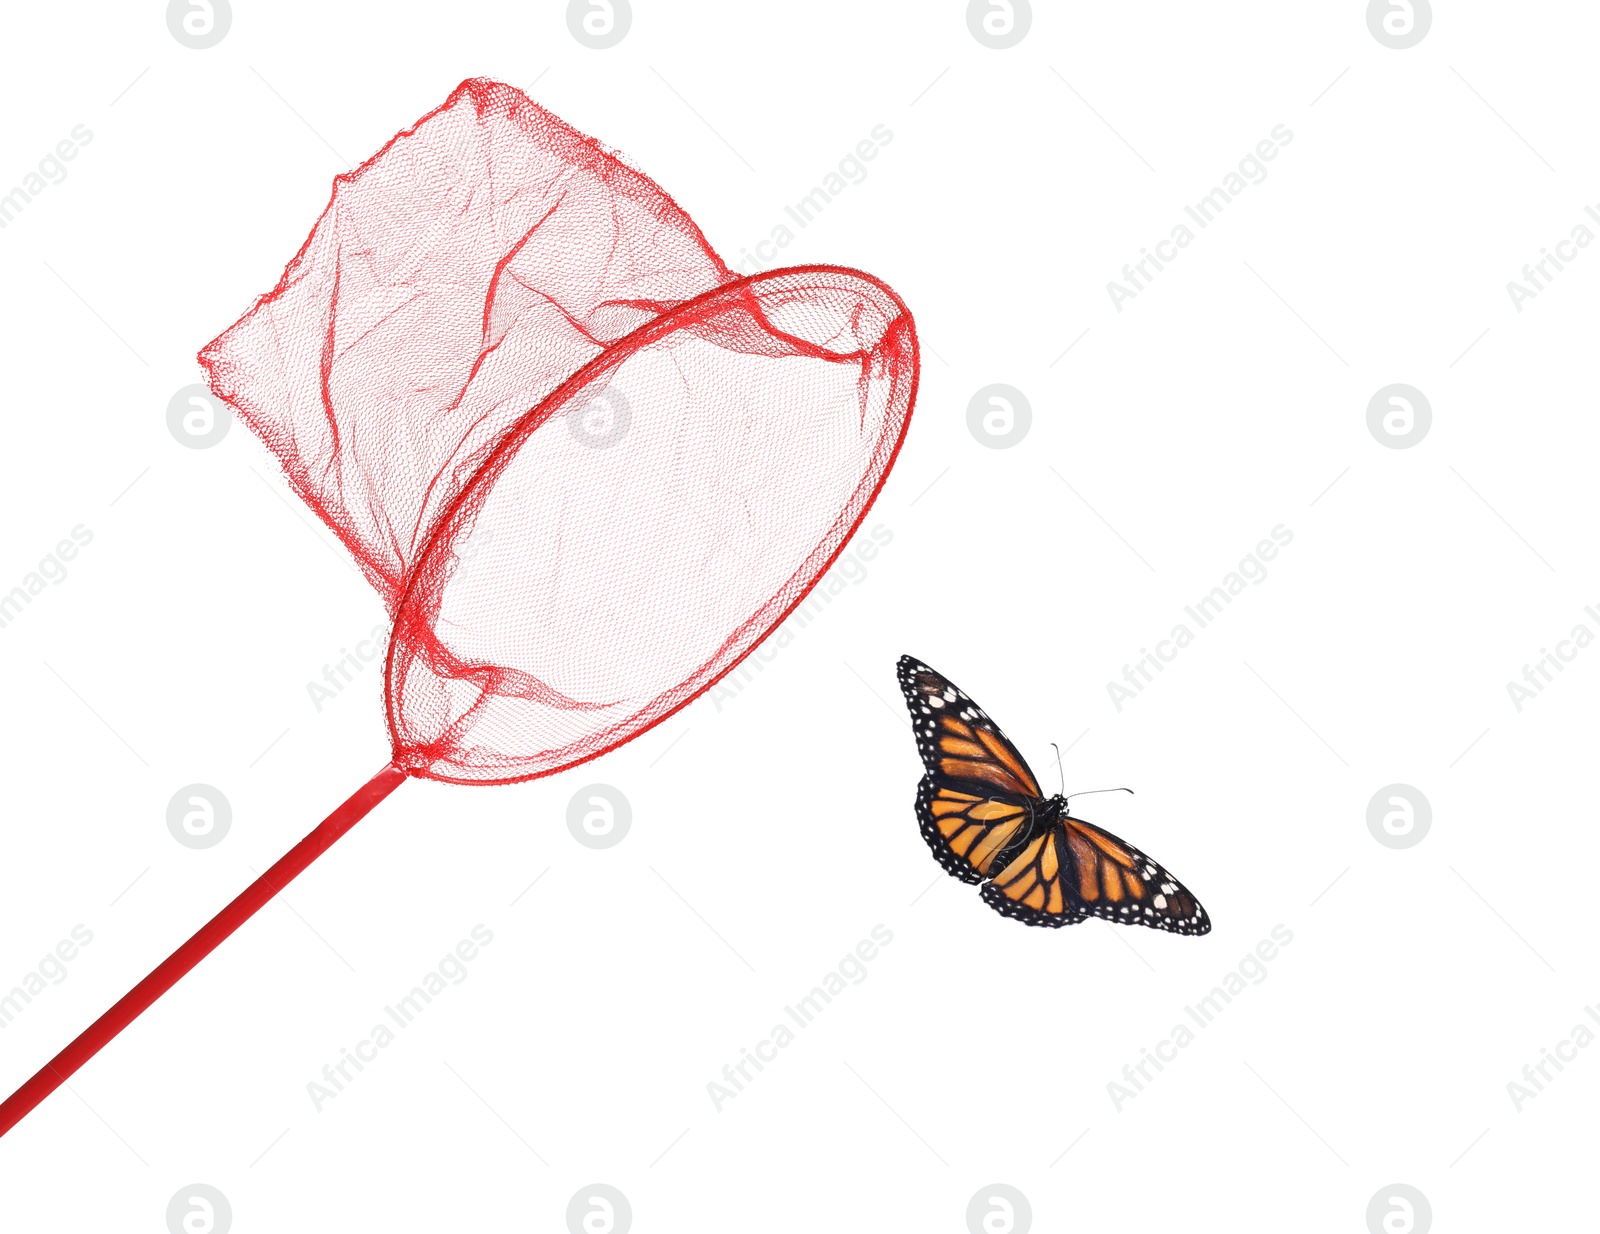 Image of Bright net and beautiful fragile monarch butterfly on white background